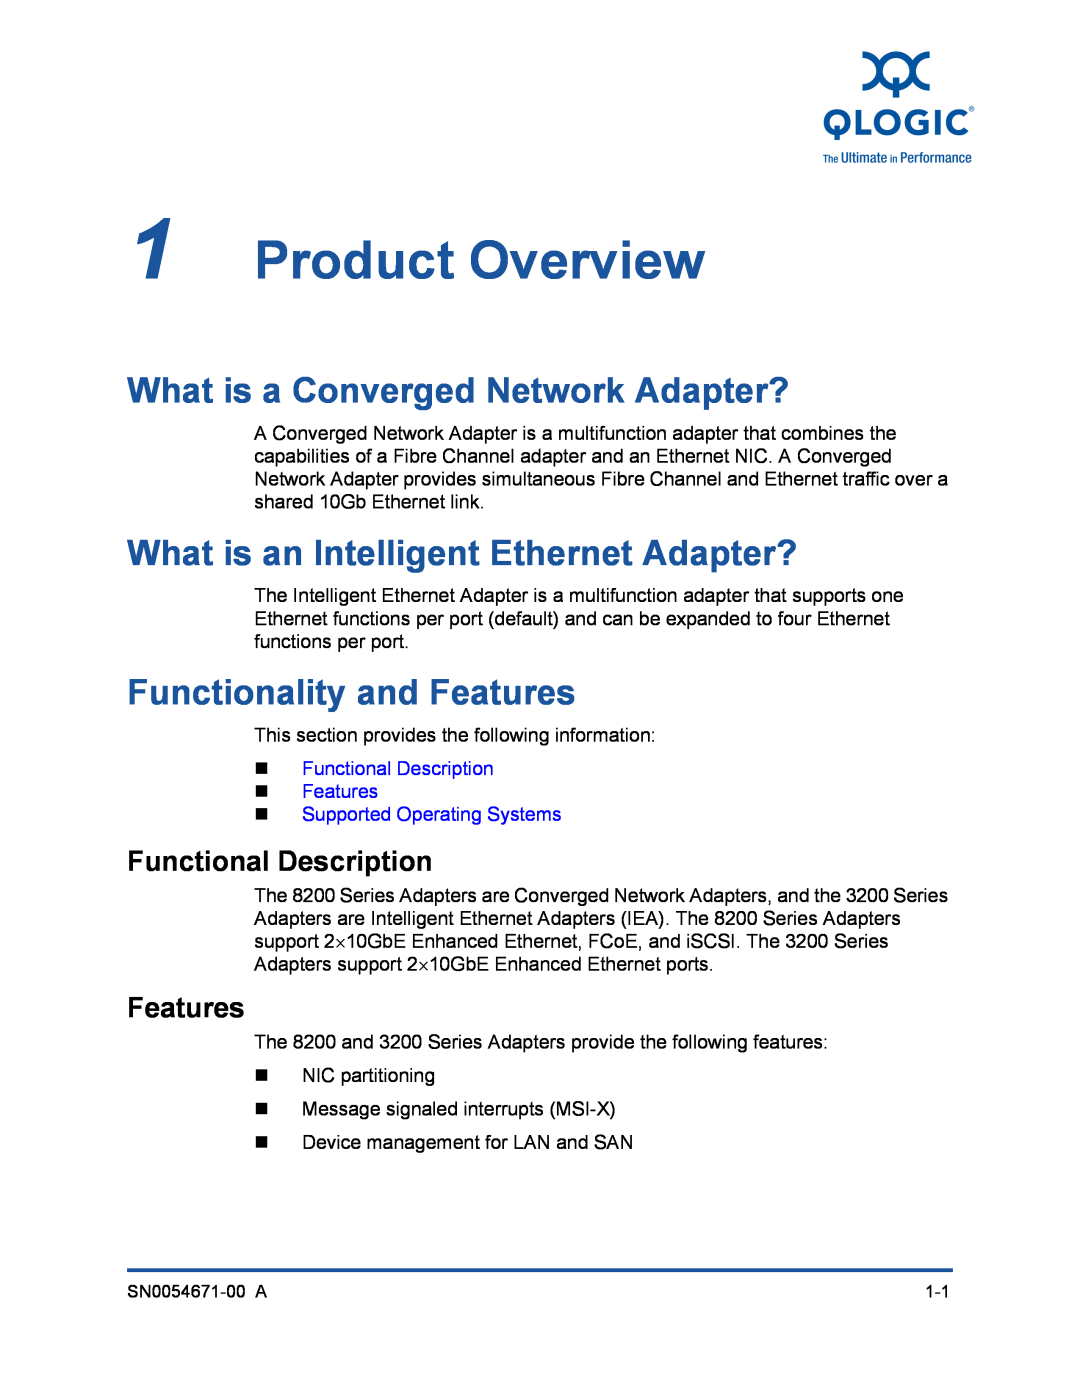 Q-Logic 3200 Product Overview, What is a Converged Network Adapter?, What is an Intelligent Ethernet Adapter?, Features 